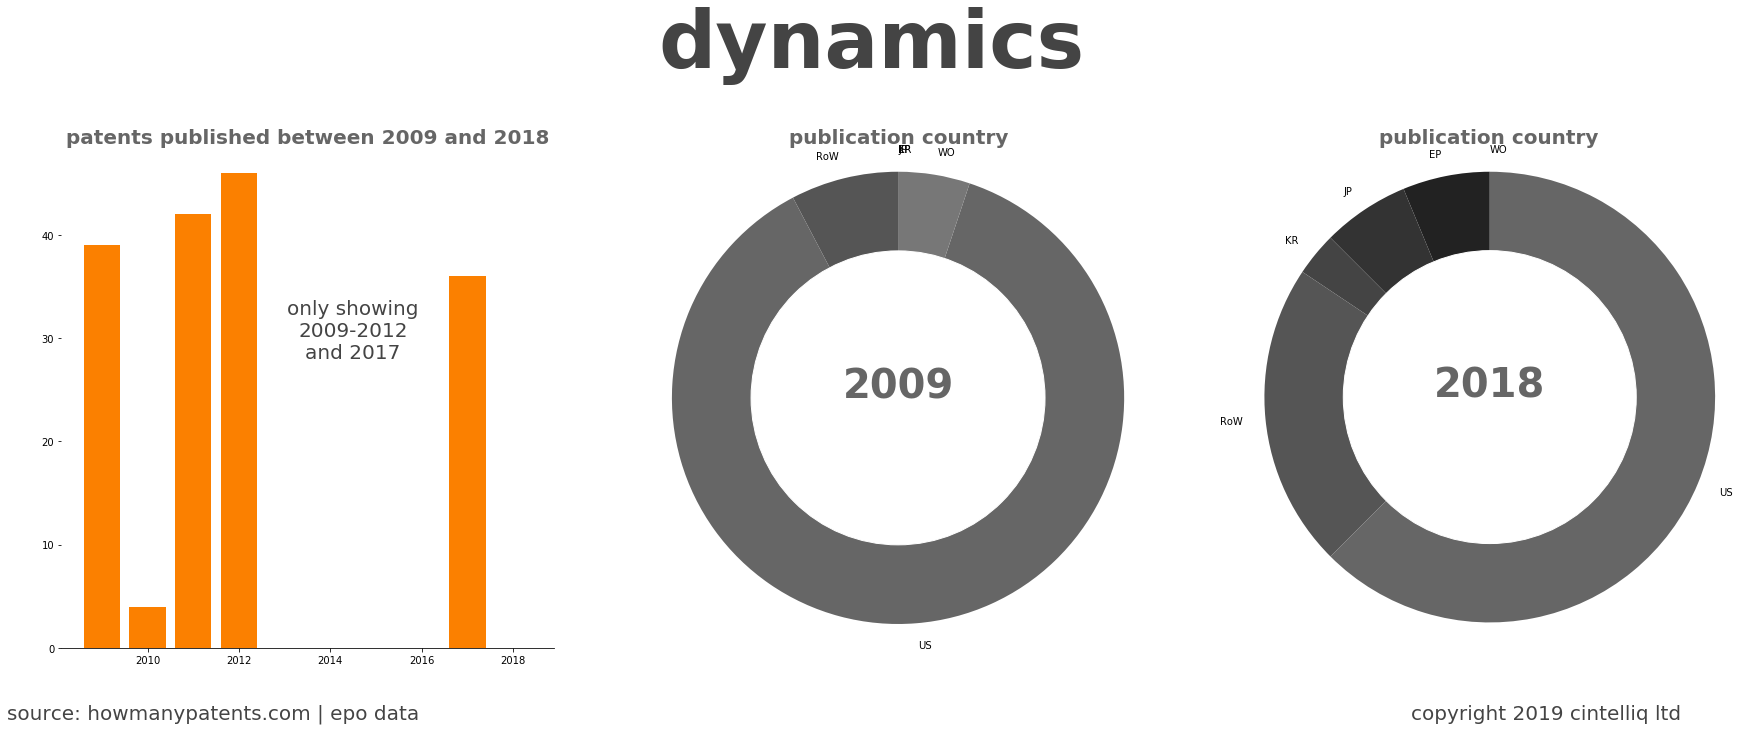 summary of patents for Dynamics